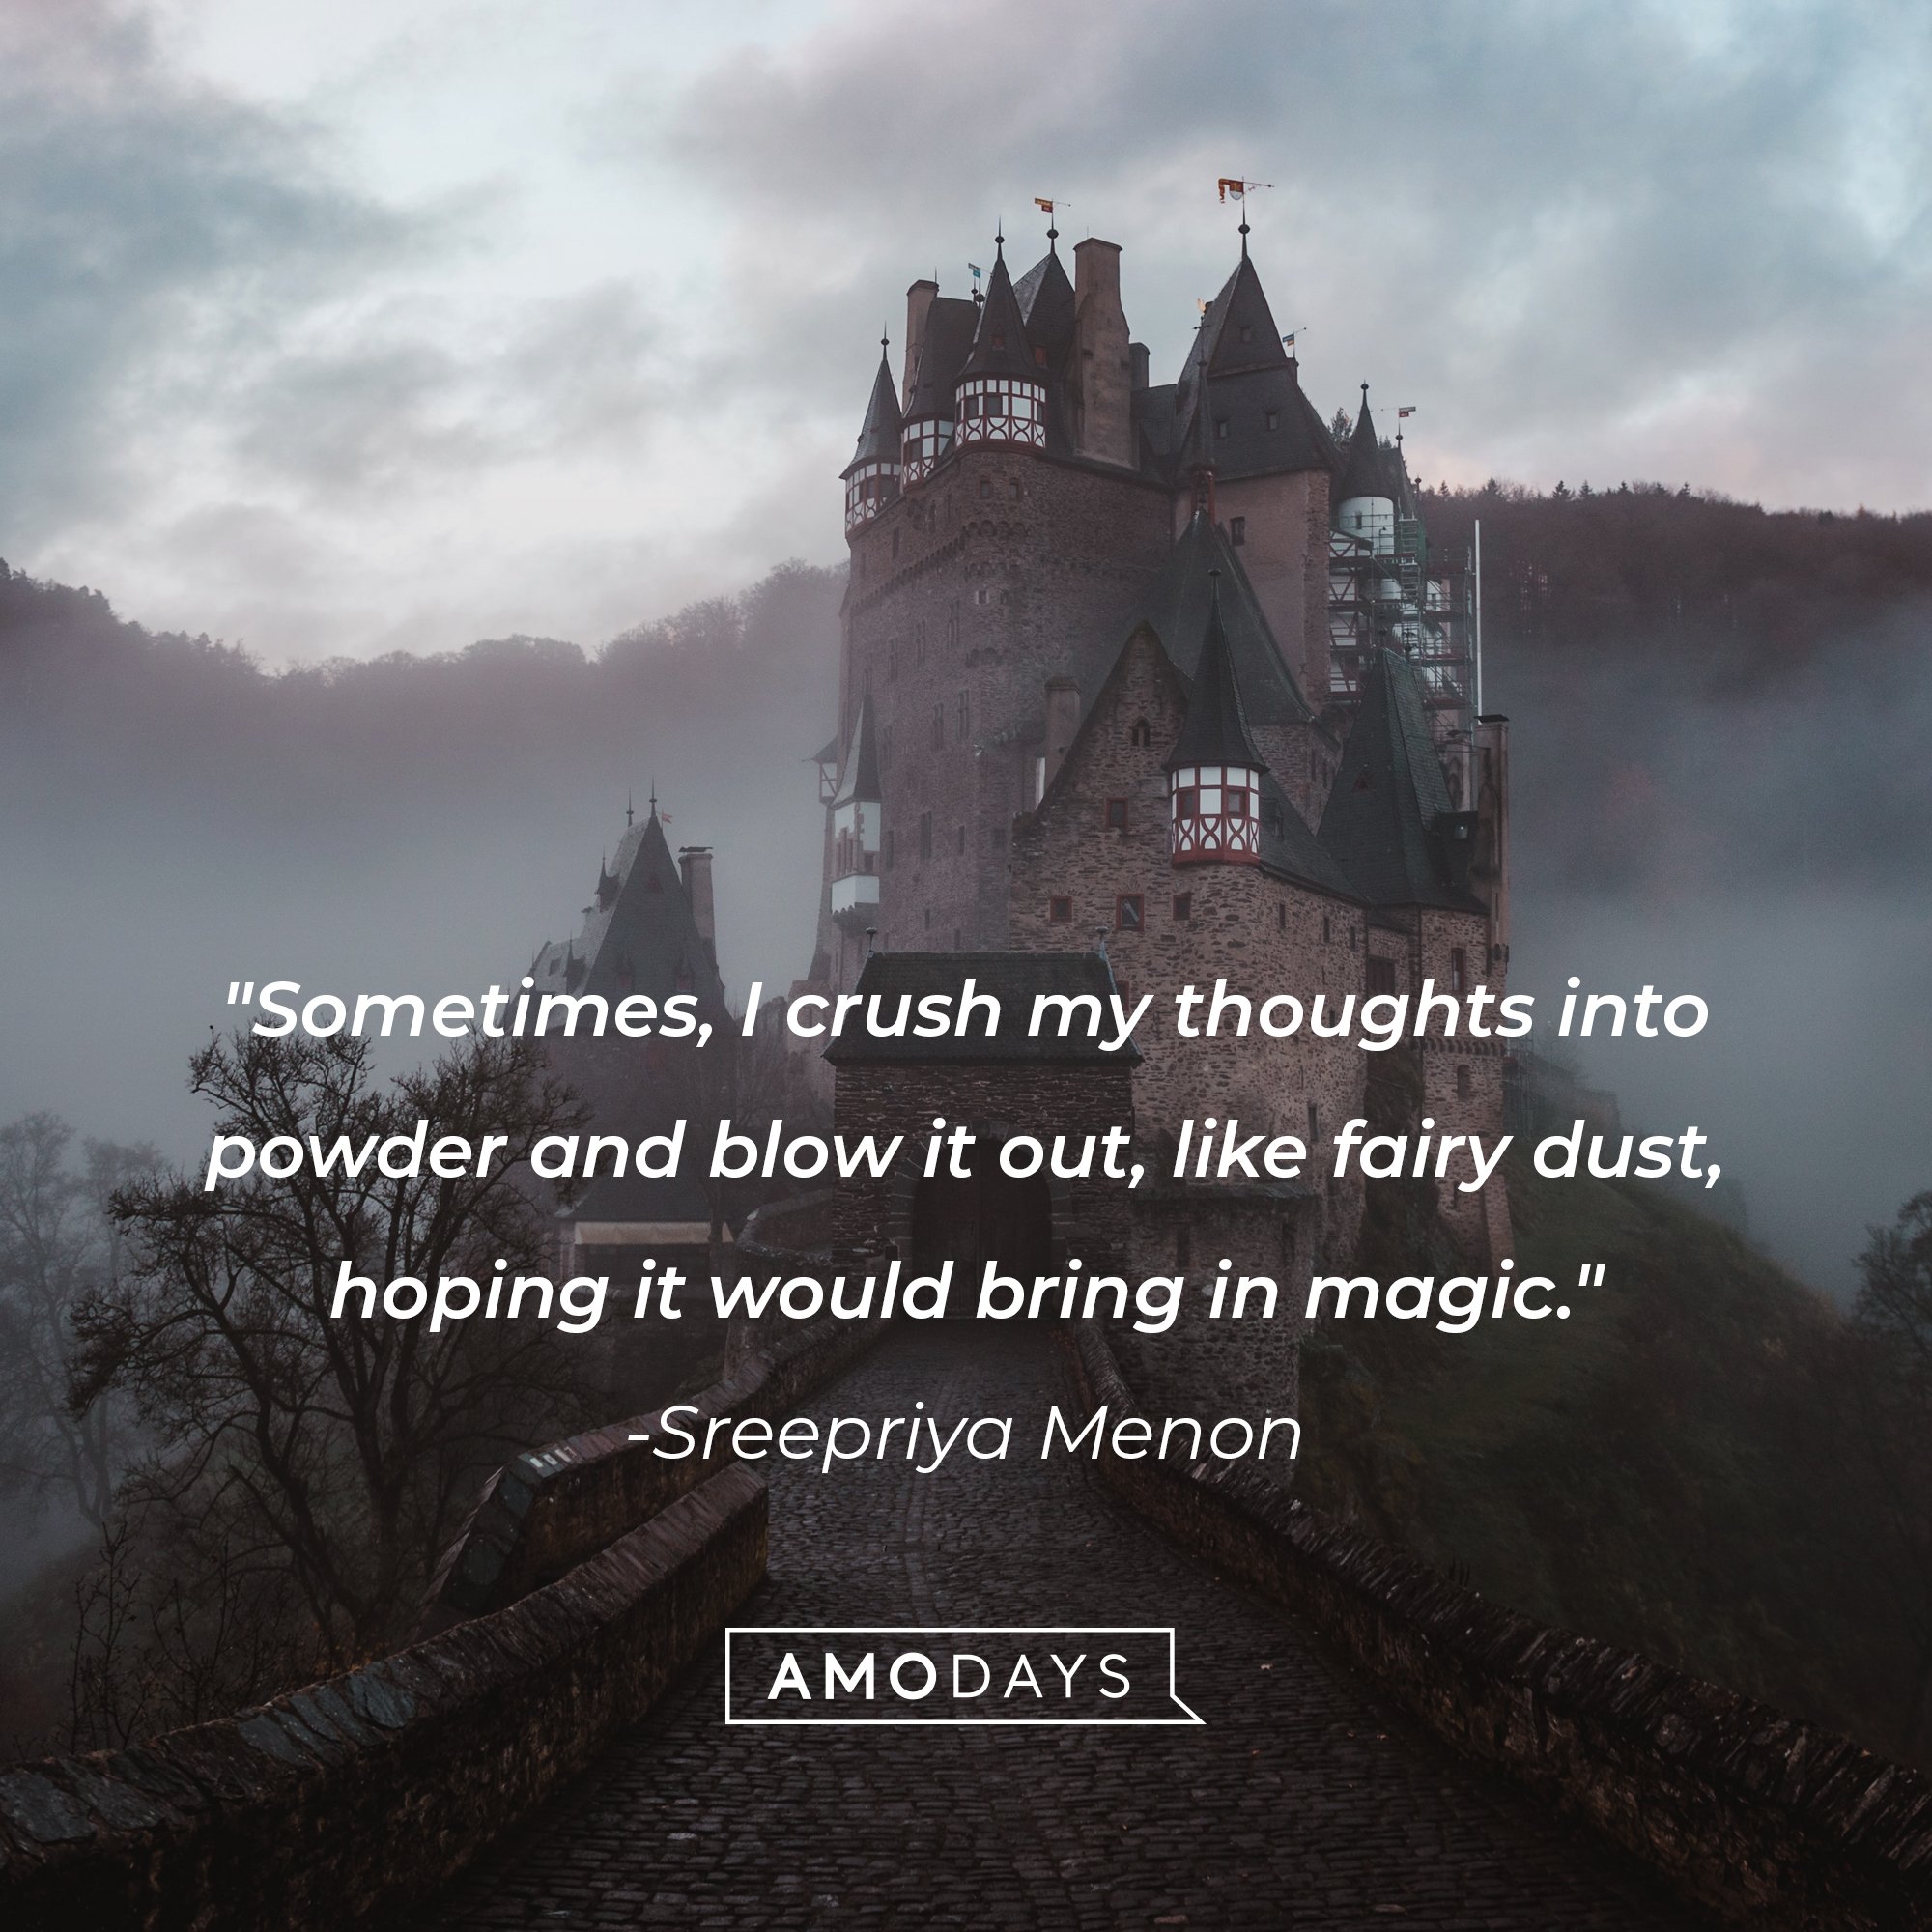 Sreepriya Menon's quote: "Sometimes, I crush my thoughts into powder and blow it out, like fairy dust, hoping it would bring in magic." | Image: Amo Days